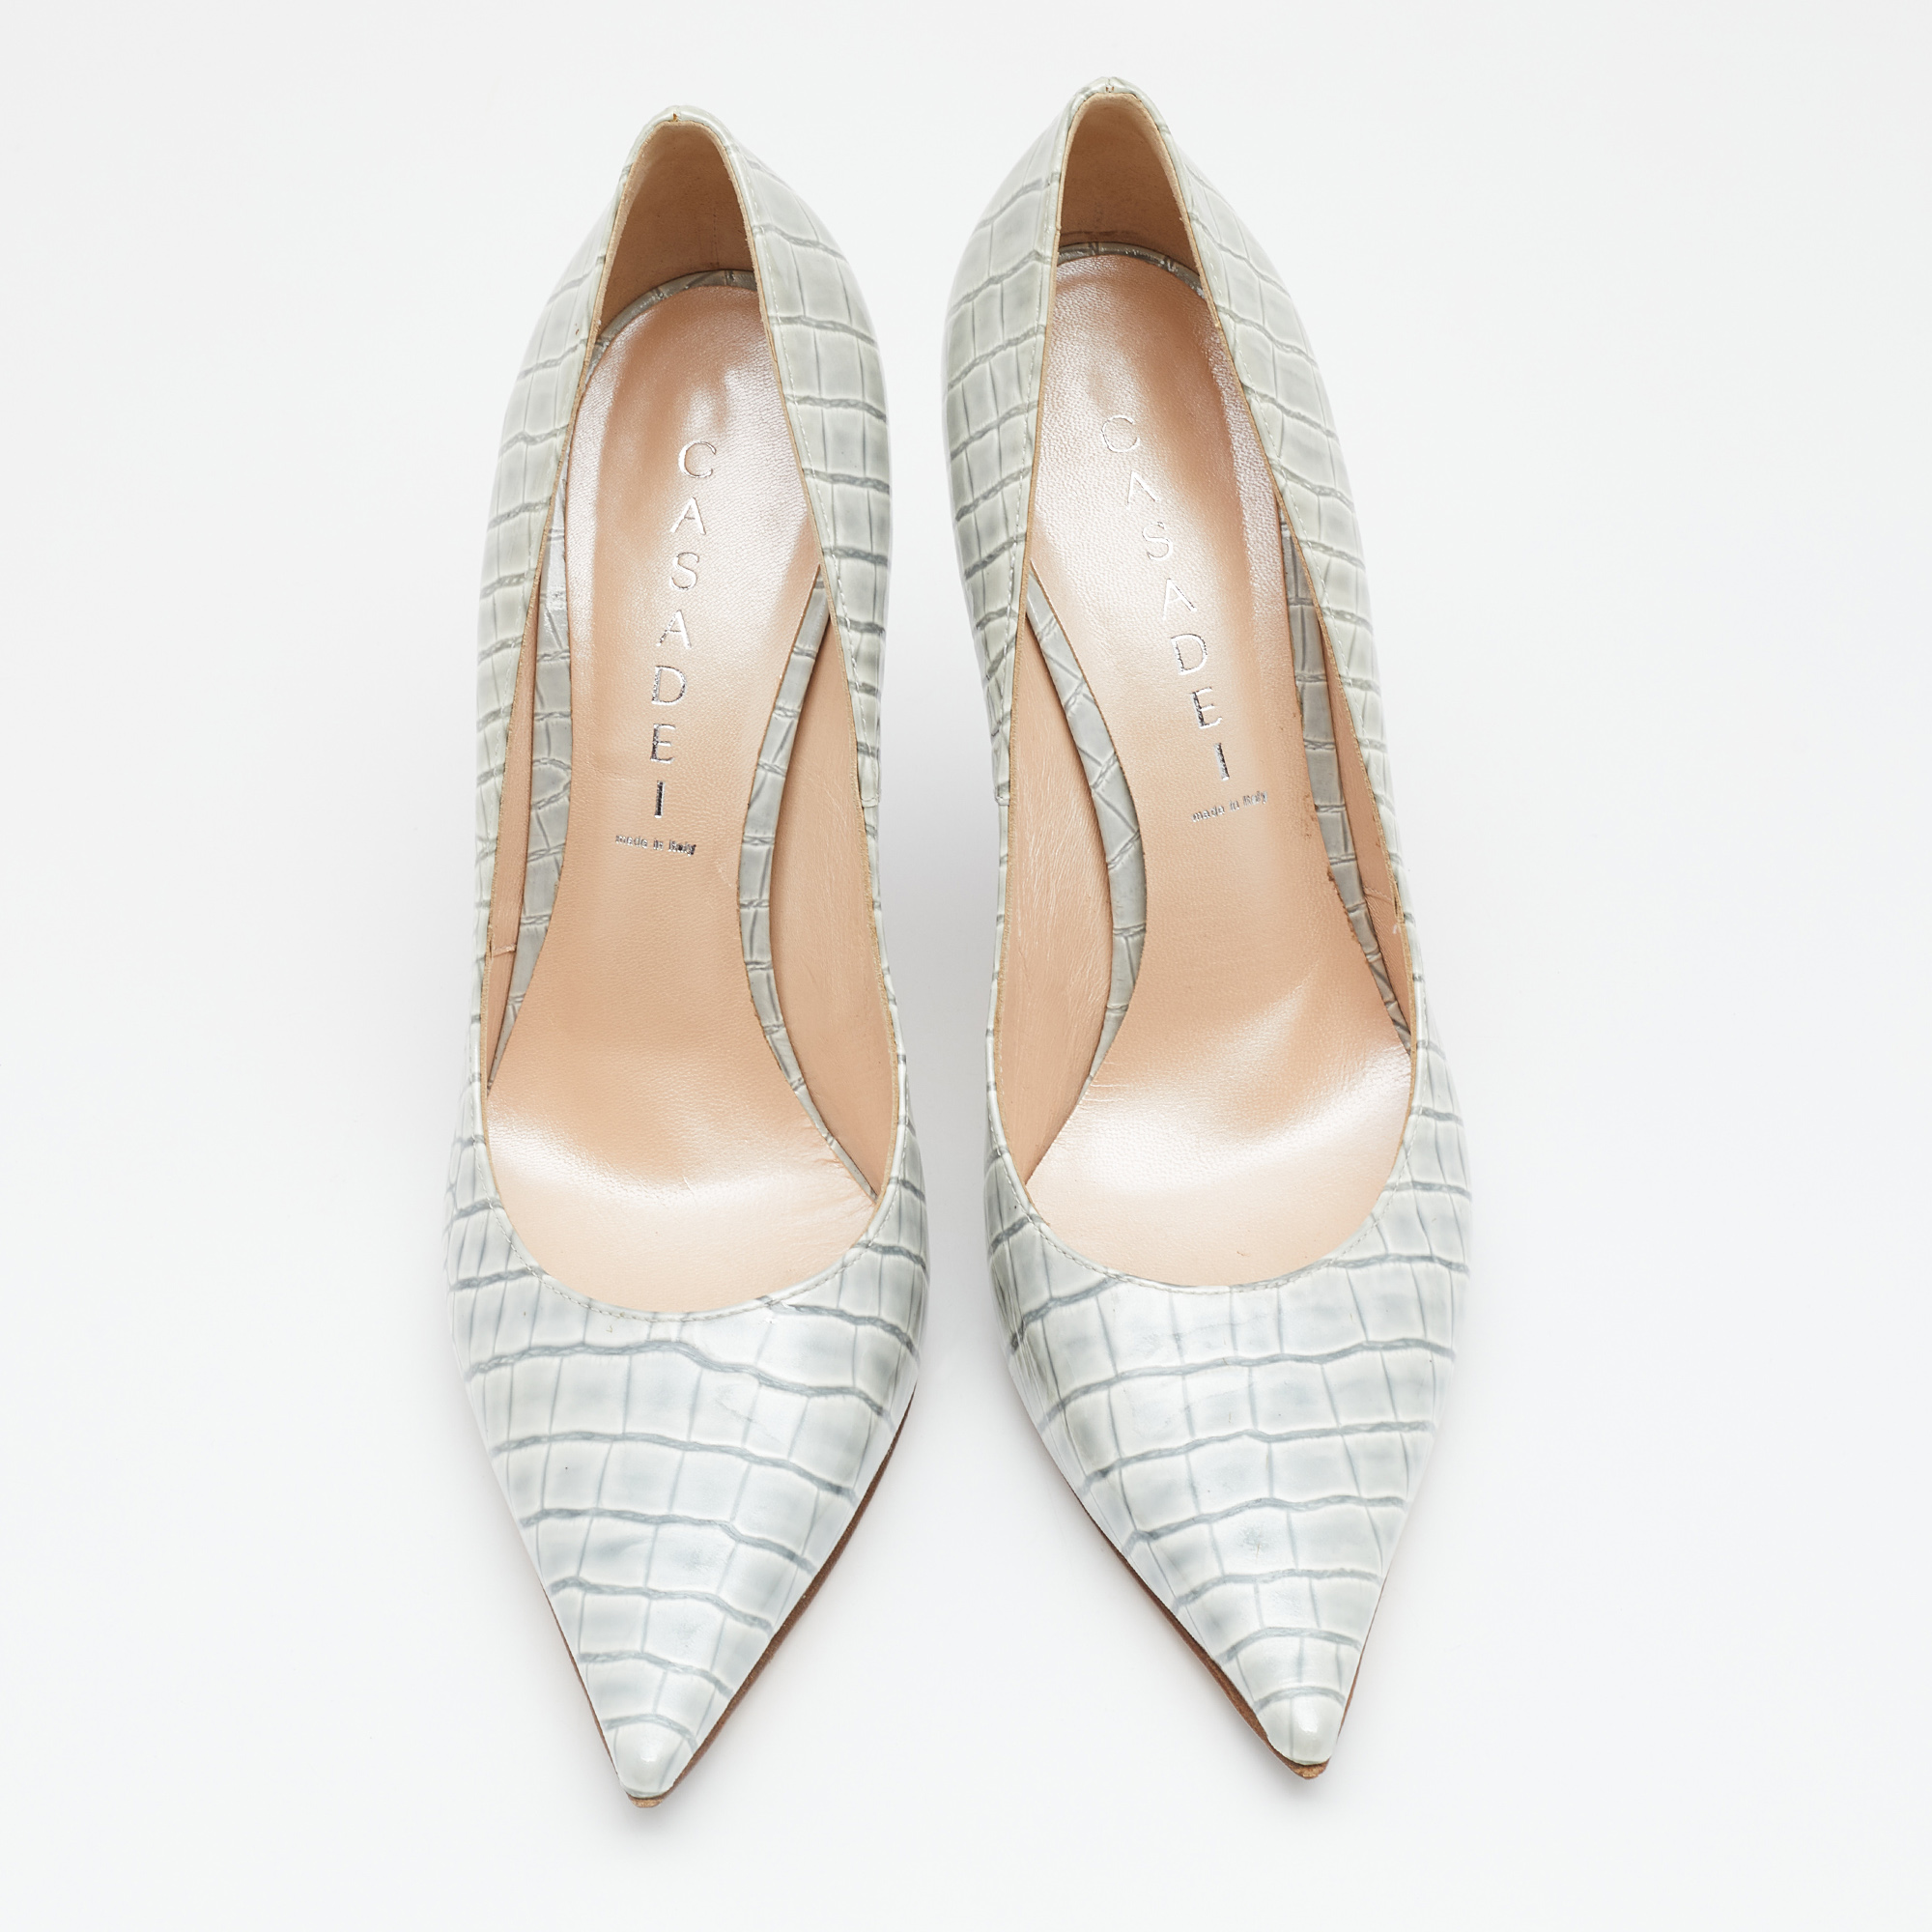 Casadei Grey Croc Embossed Patent Leather Pointed Toe Pumps Size 38.5